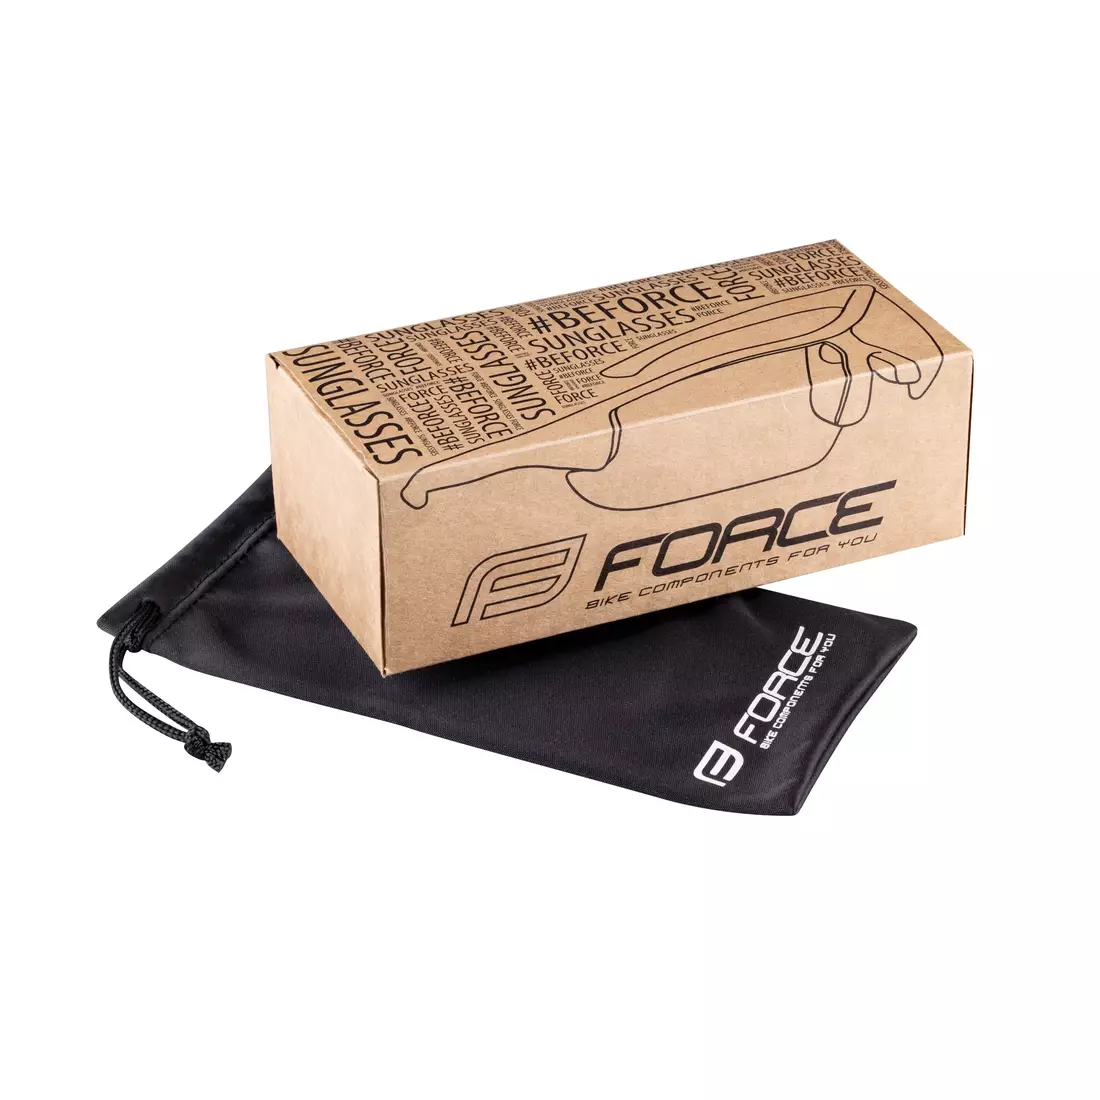 FORCE cycling / sports glasses OMBRO PLUS black mat, 91106